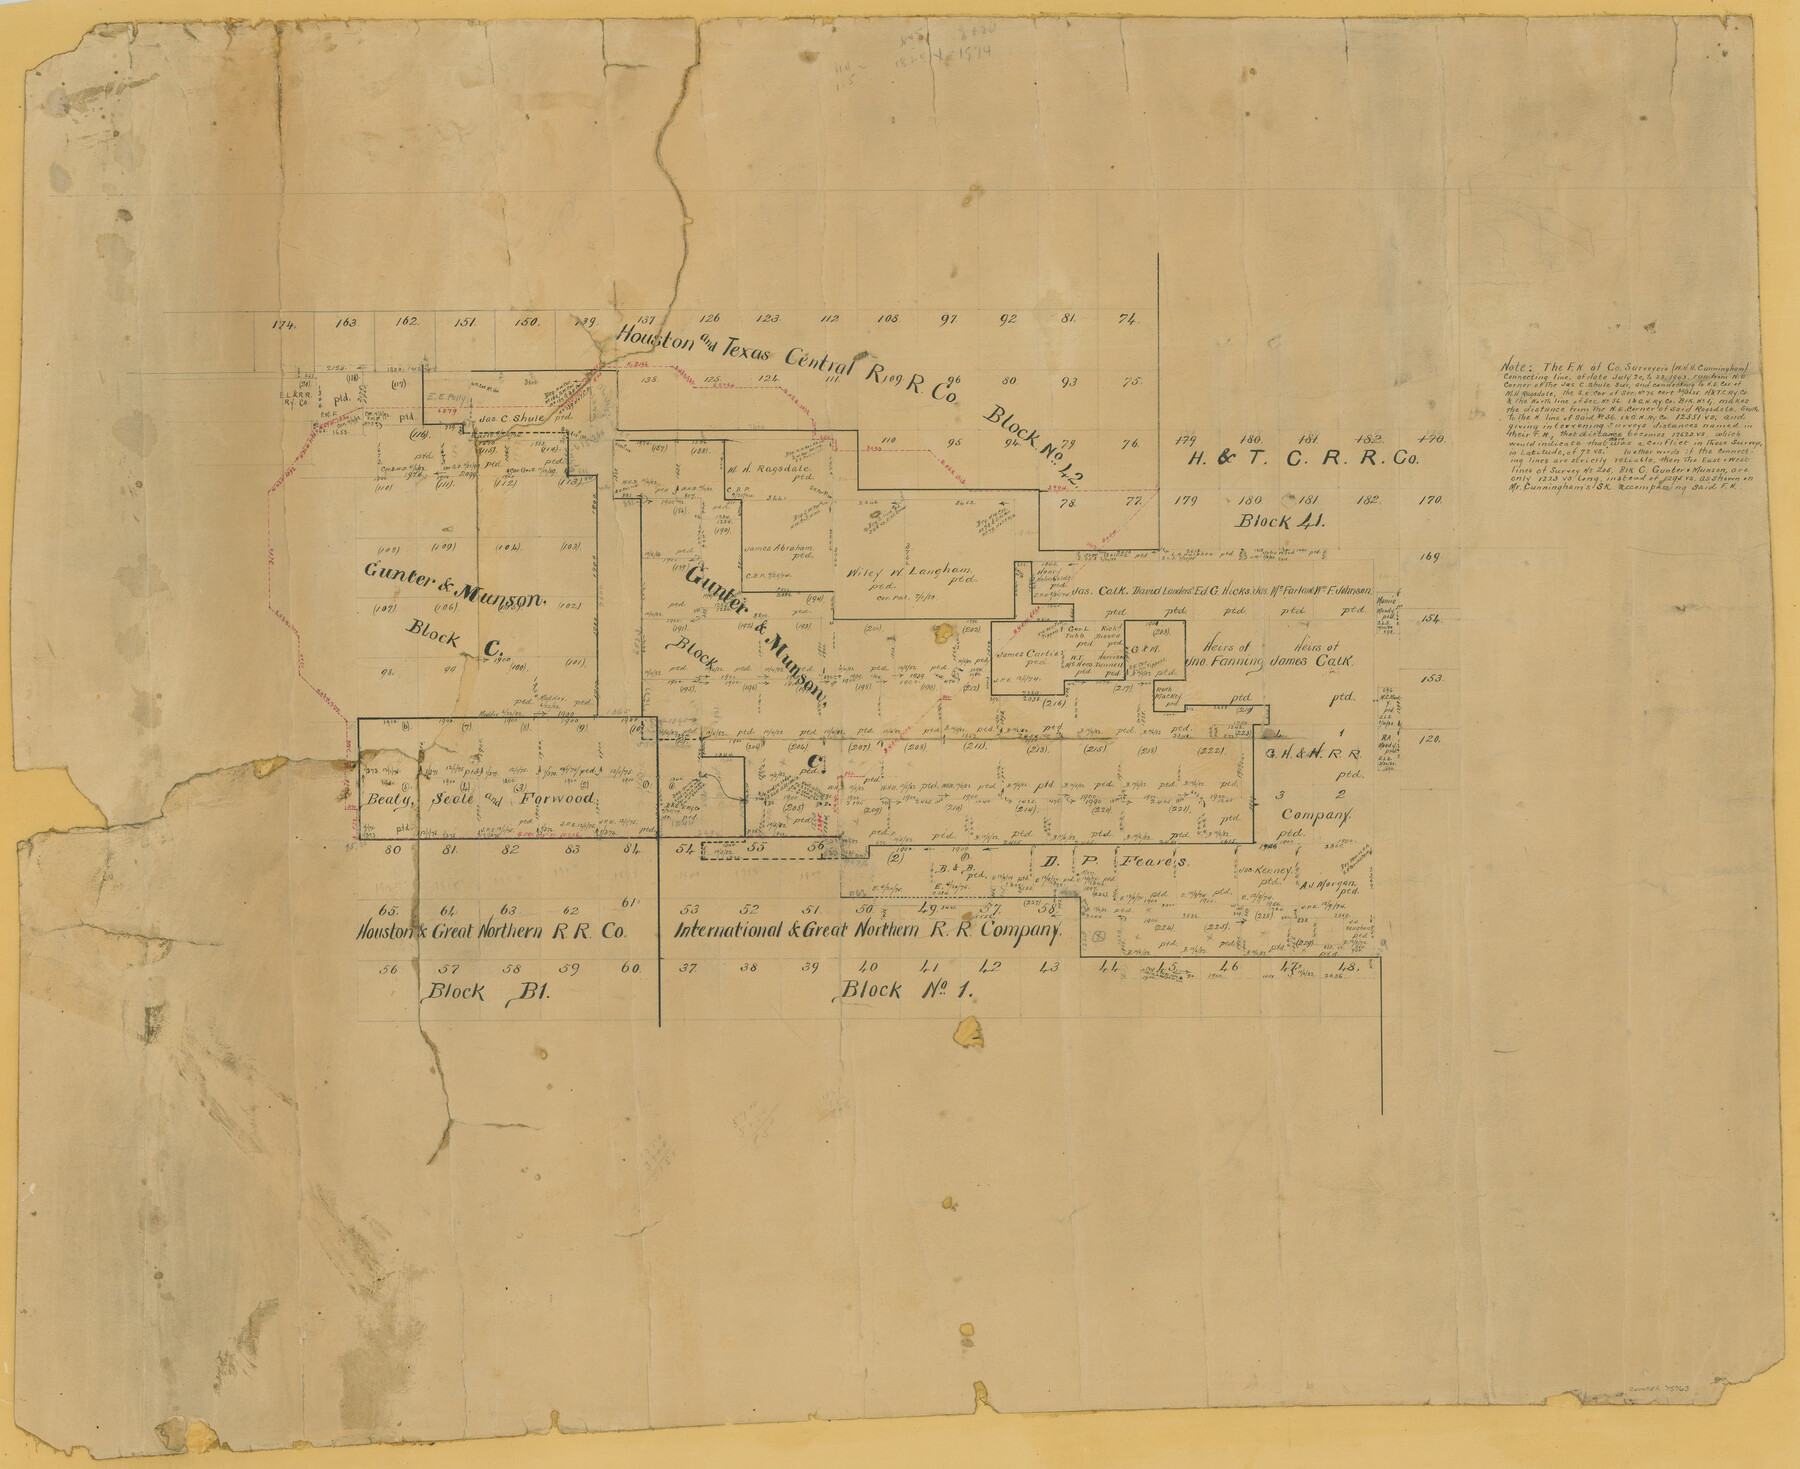 75763, [Surveying Sketch of Houston and Texas Central R. R. Co., Gunter & Munson, Houston & Great Northern R. R. Co., International & Great Northern R. R. Company, et al], Maddox Collection